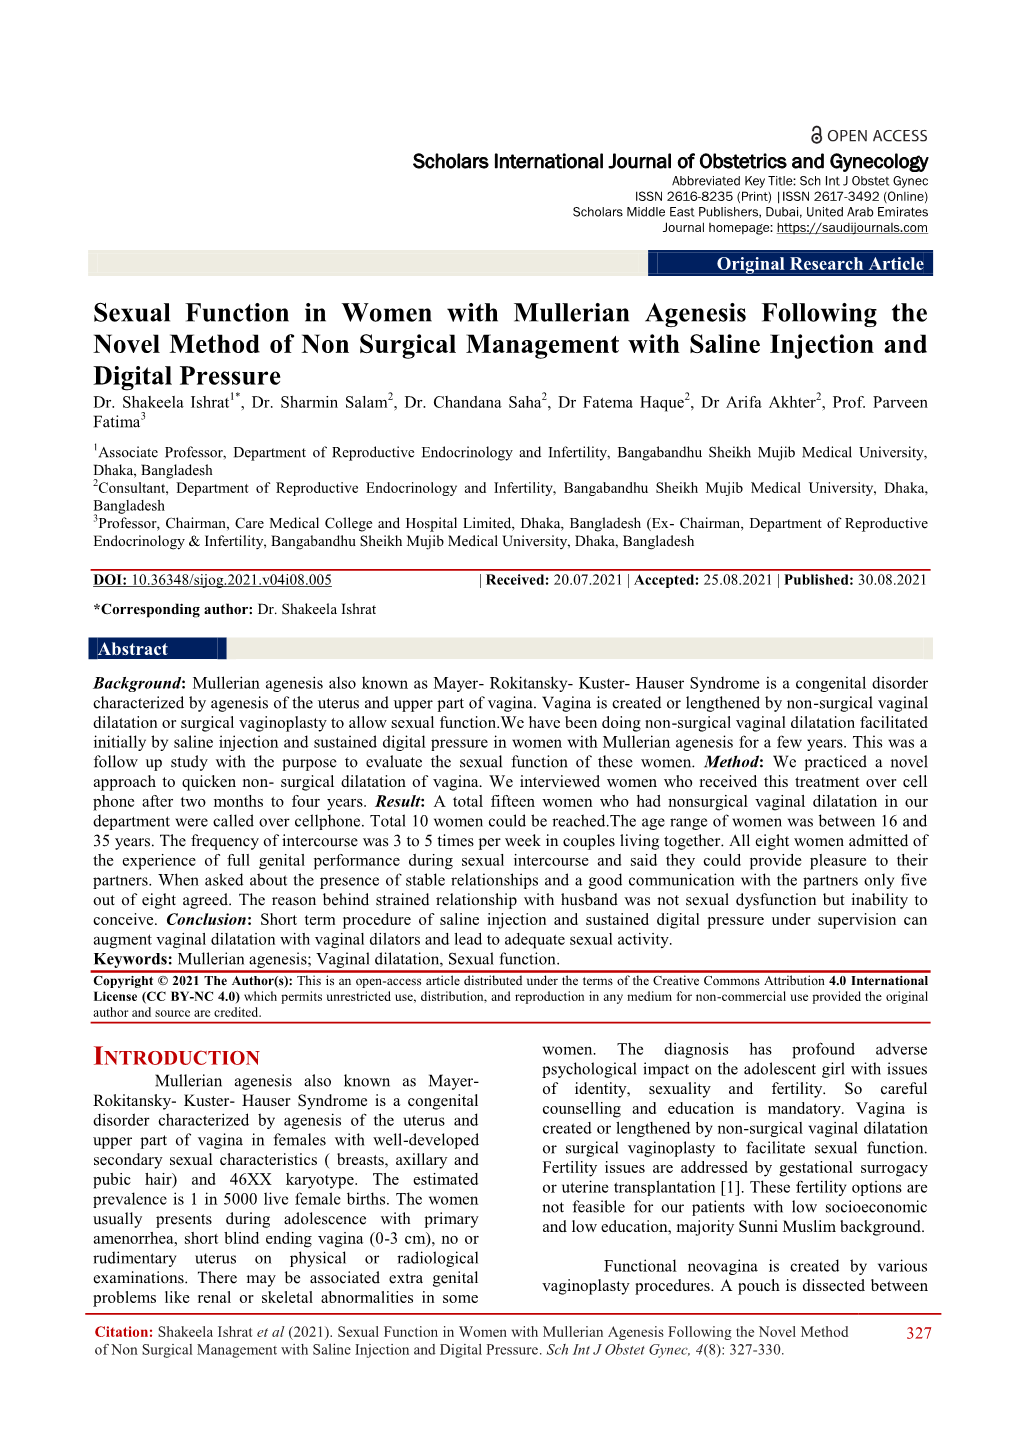 Sexual Function in Women with Mullerian Agenesis Following the Novel Method of Non Surgical Management with Saline Injection and Digital Pressure Dr